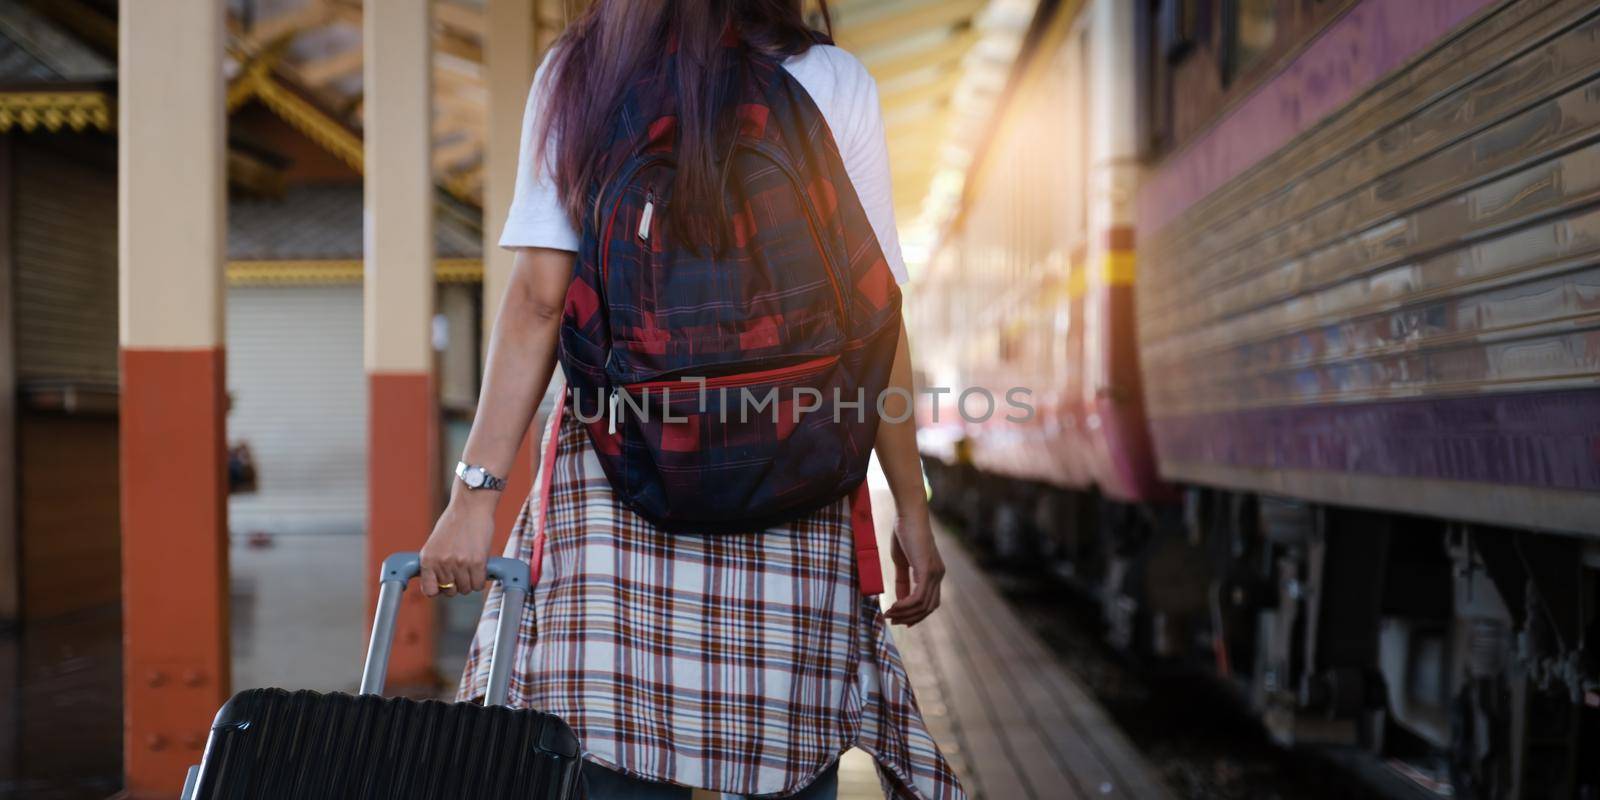 Alone traveler tourist walking with backpack and luggage at train station. work and travel lifestyle concept